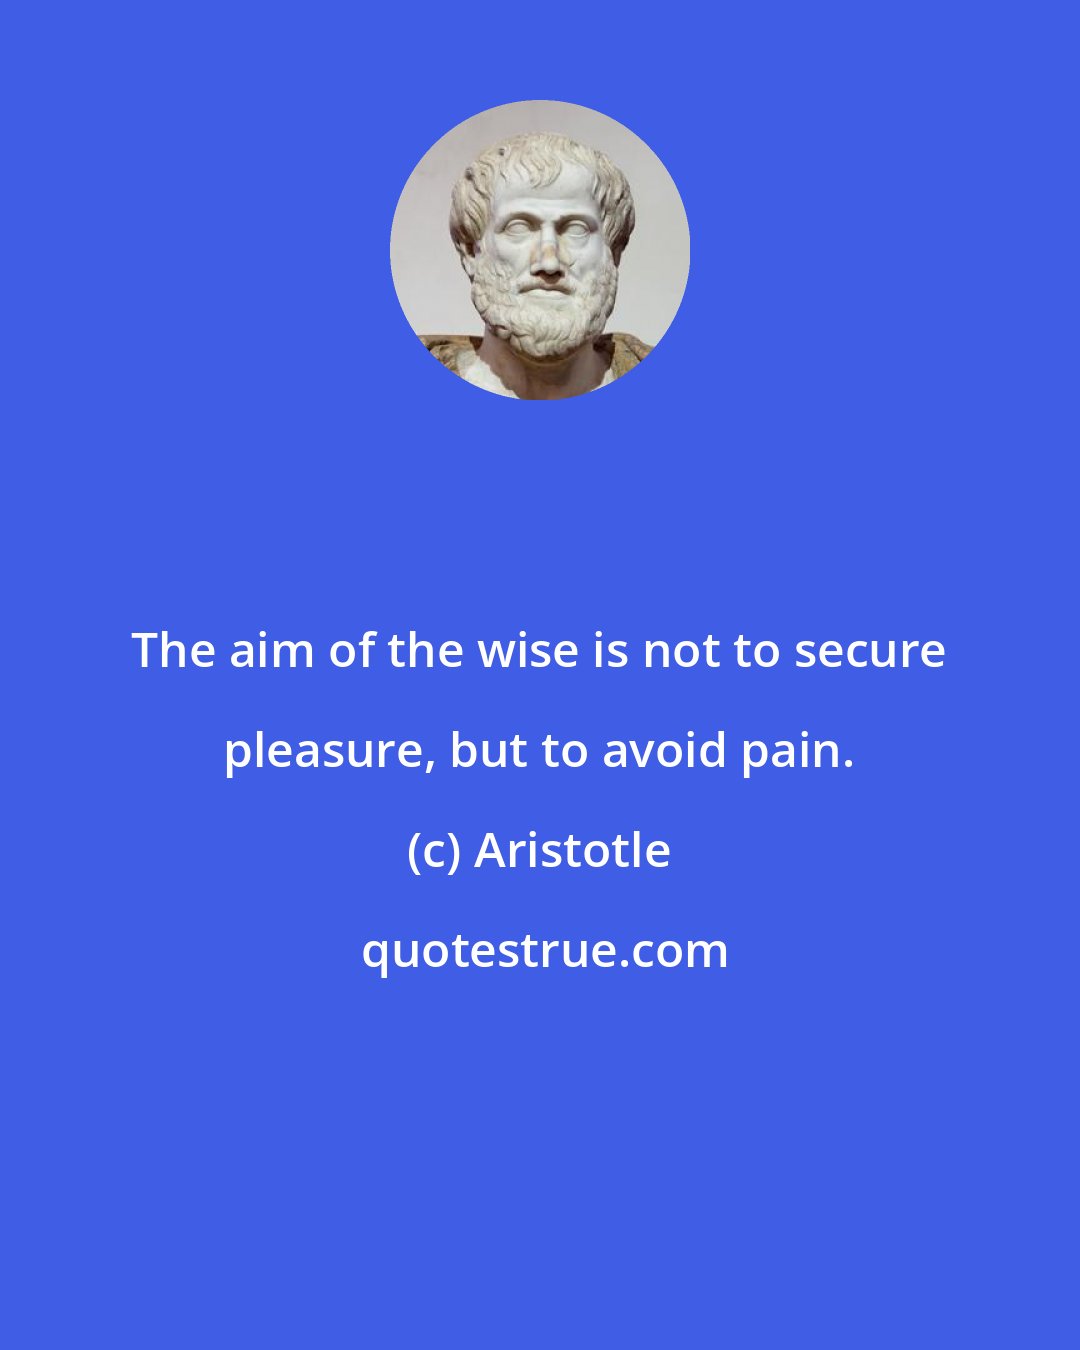 Aristotle: The aim of the wise is not to secure pleasure, but to avoid pain.